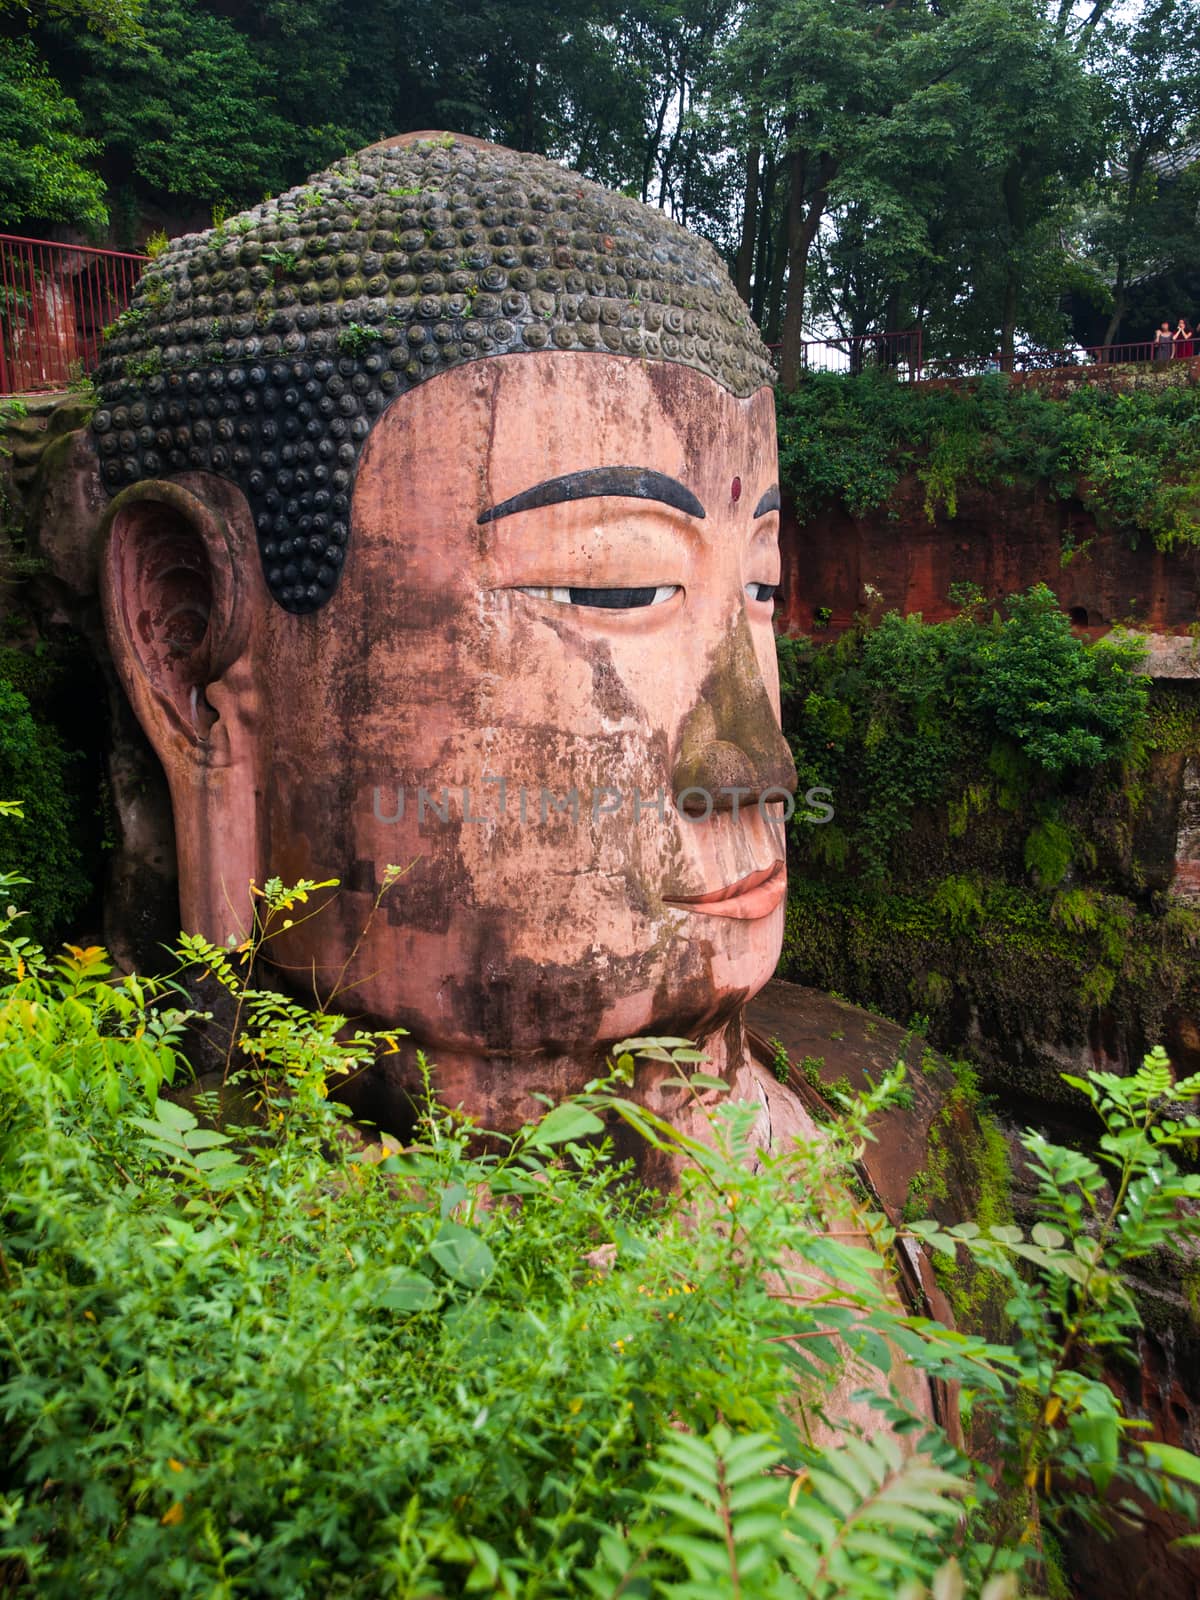 The largest Budha in the world (Leshan, Sichuan, China)